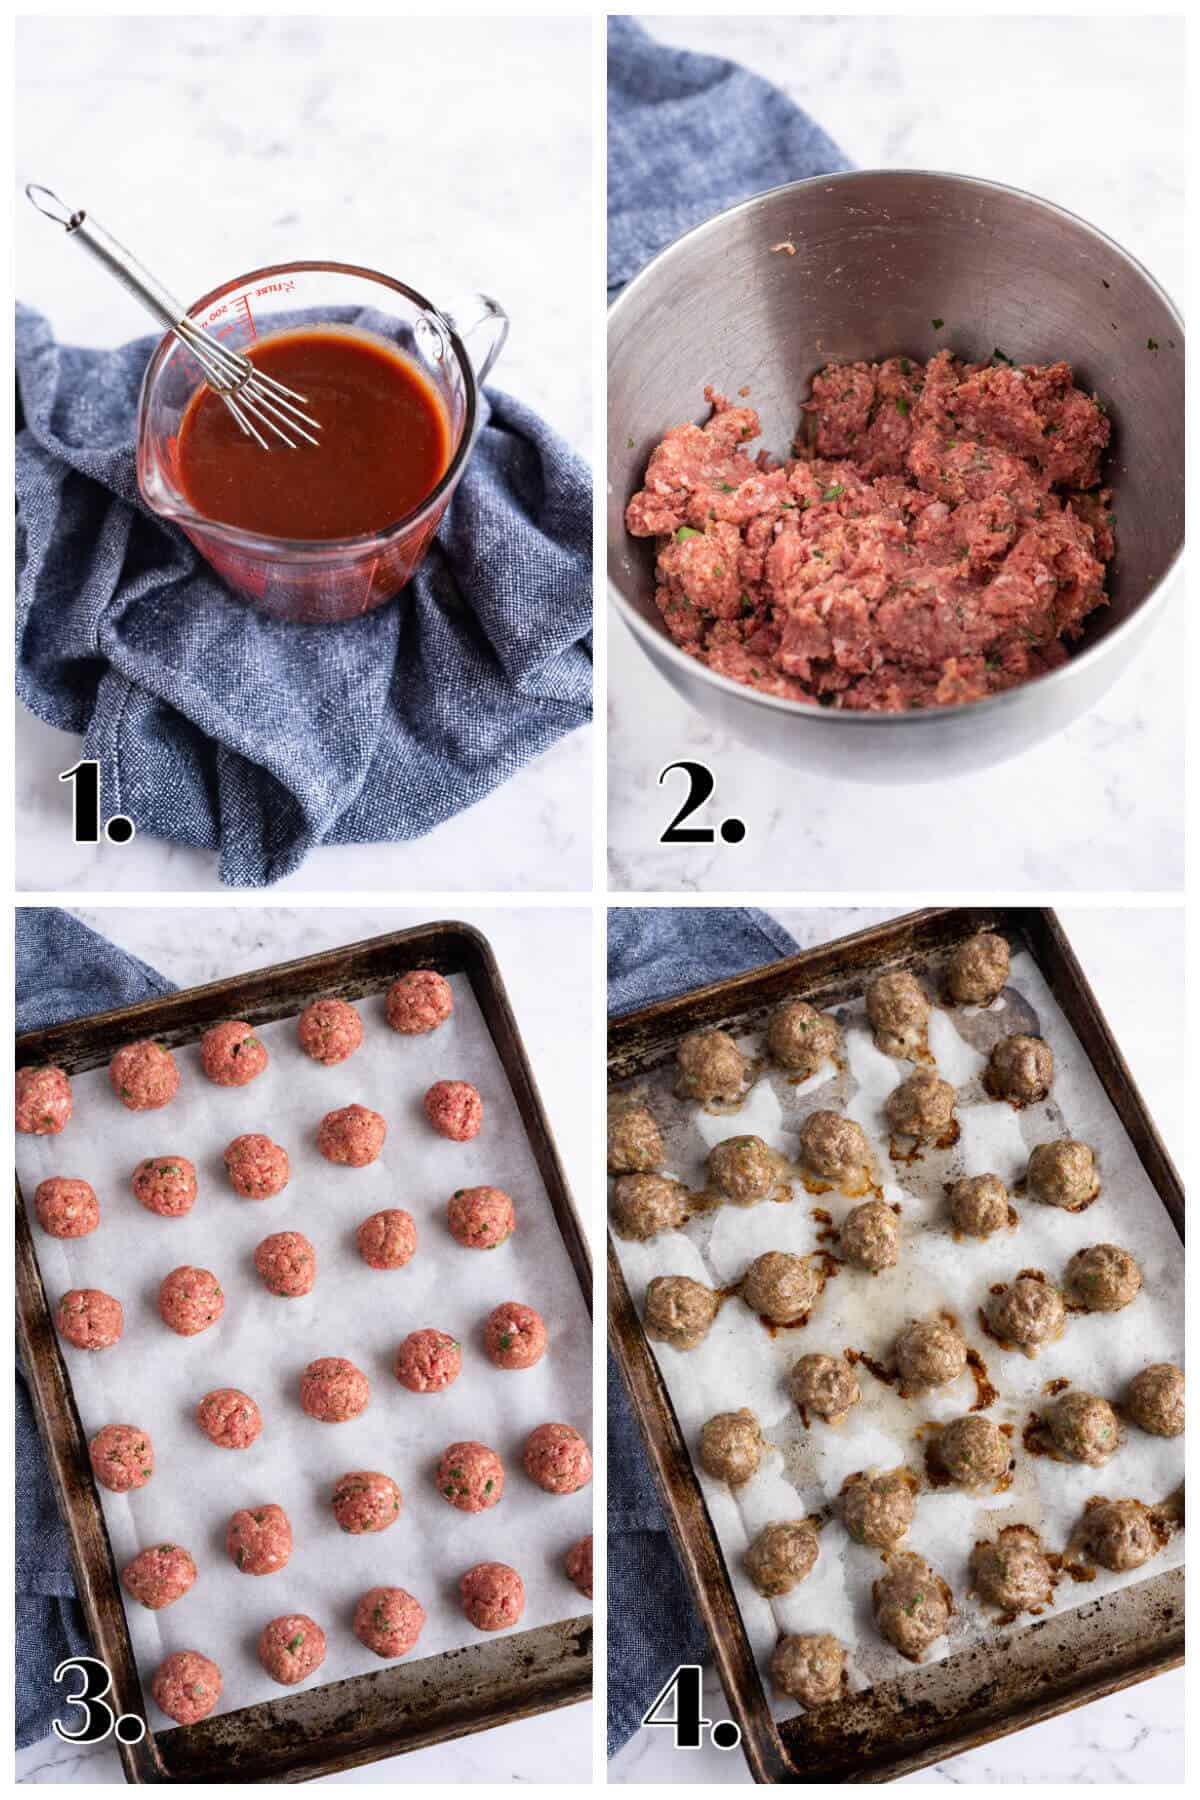 Four image collage showing how to make homemade meatballs with BBQ sauce.